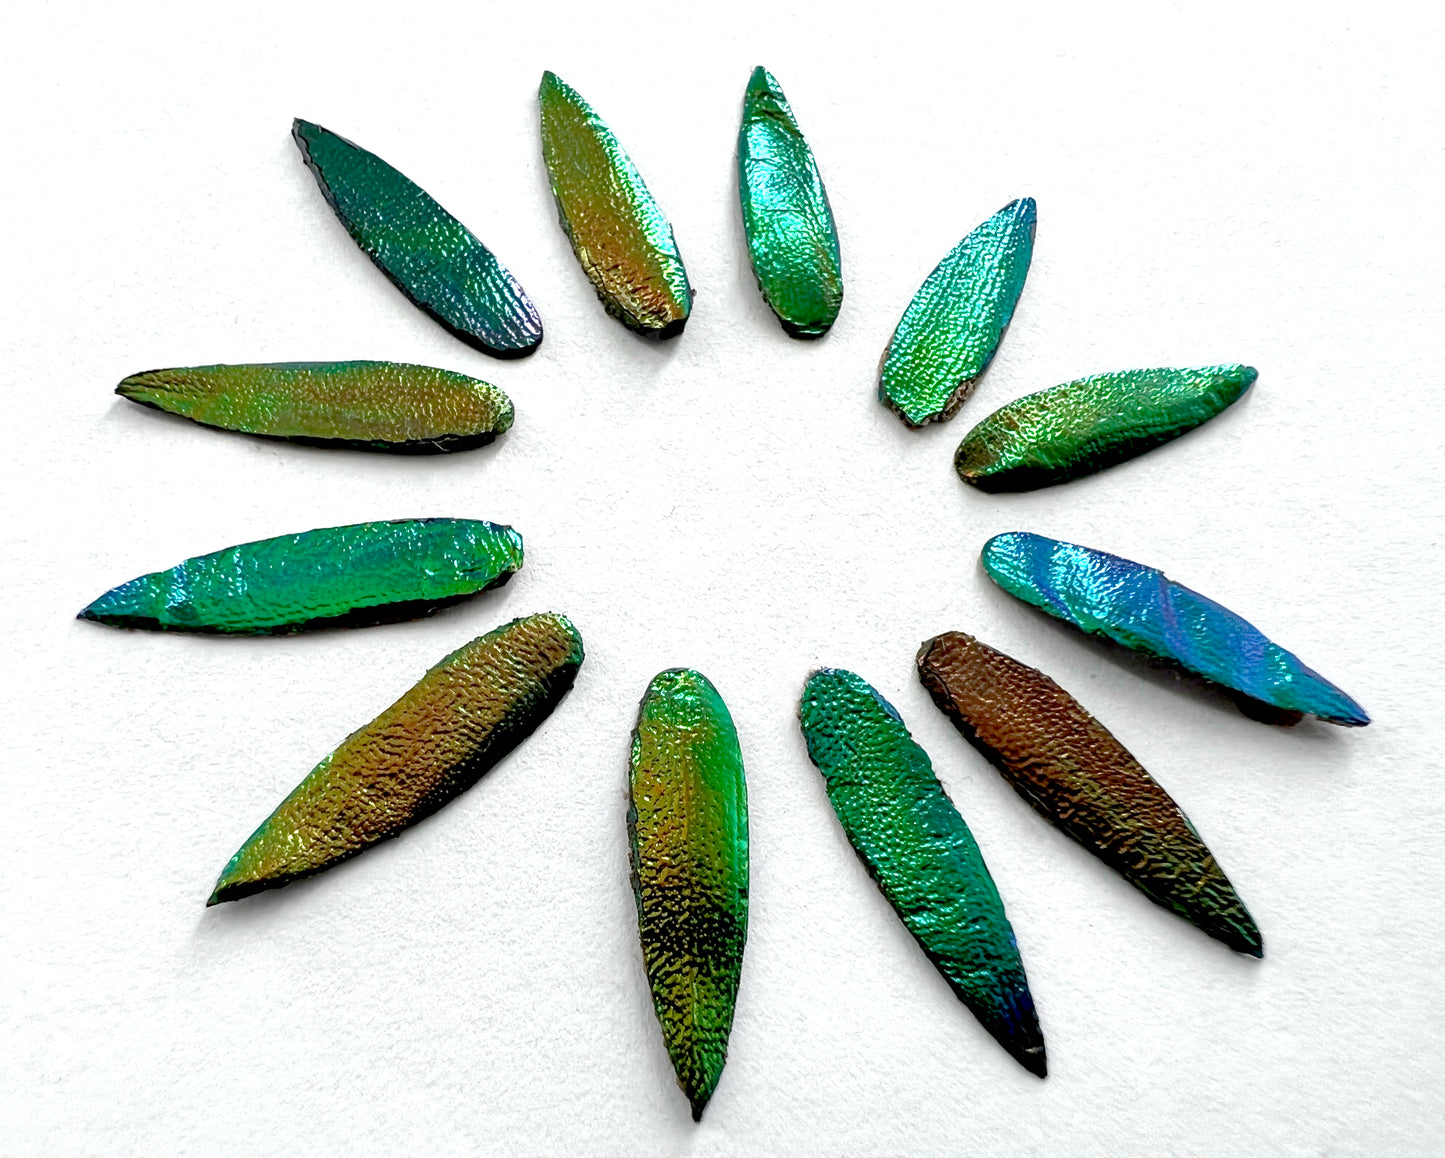 Jewel Beetles Wings UNDRILLED NO-HOLE 100 Pcs for Art & Craft (Tile Spear 1 X 2 CM)